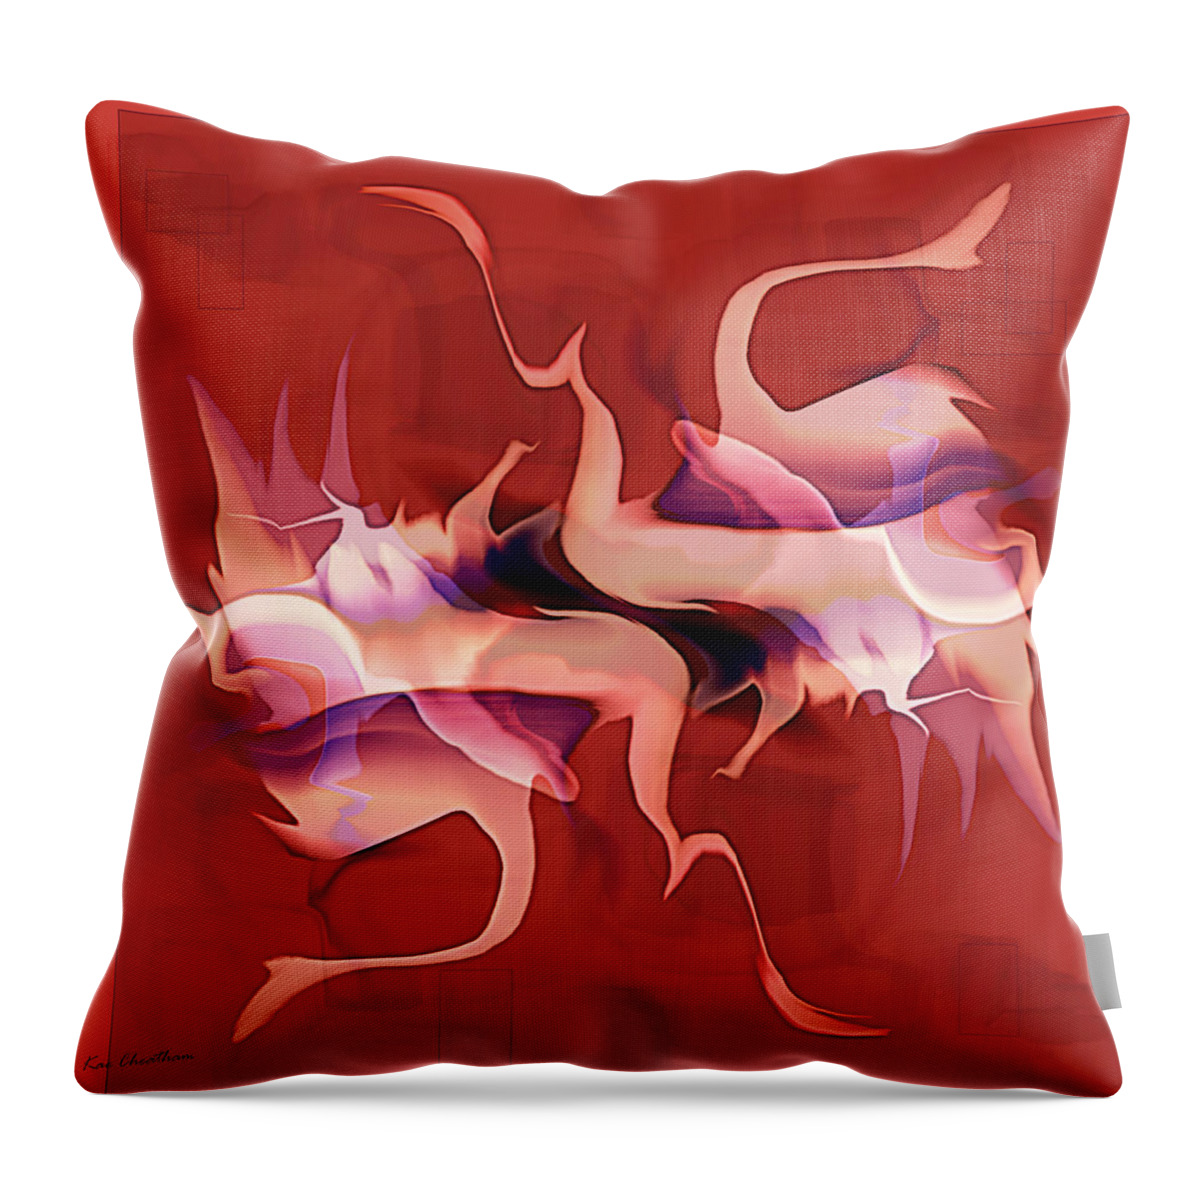 Abstract Throw Pillow featuring the digital art Flailing Abstract by Kae Cheatham